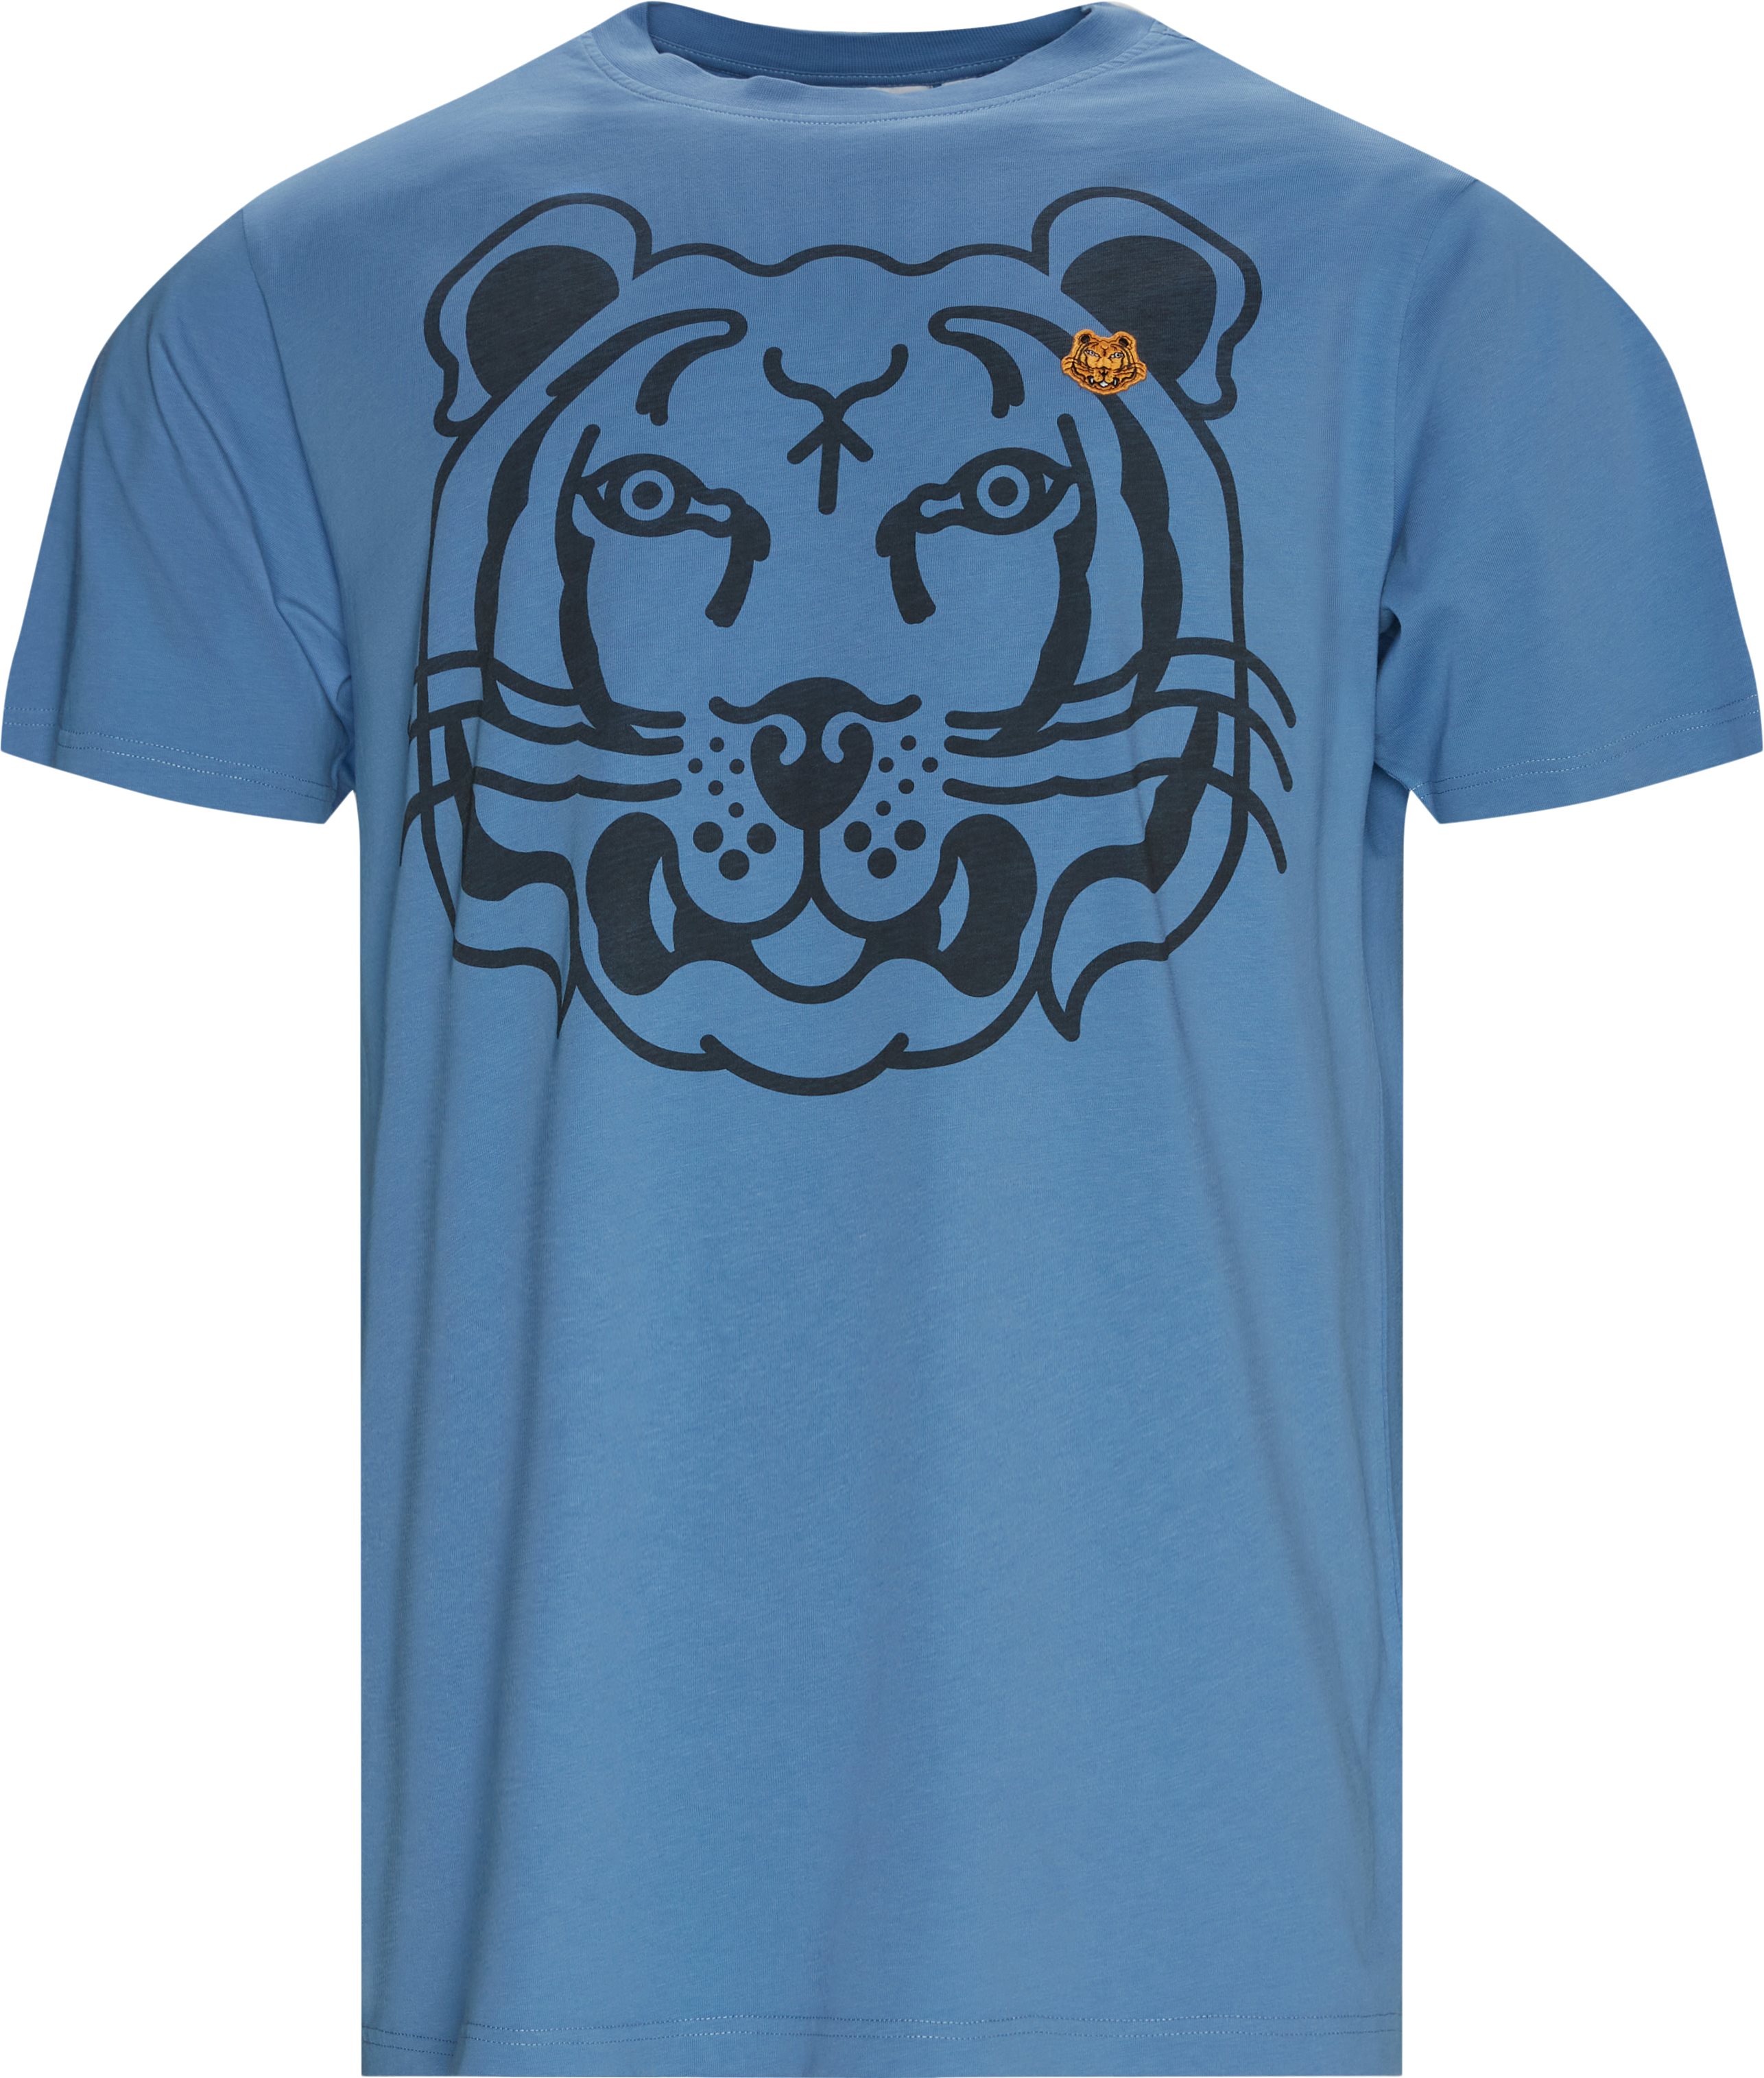 K-Tiger Tee - T-shirts - Oversize fit - Blue